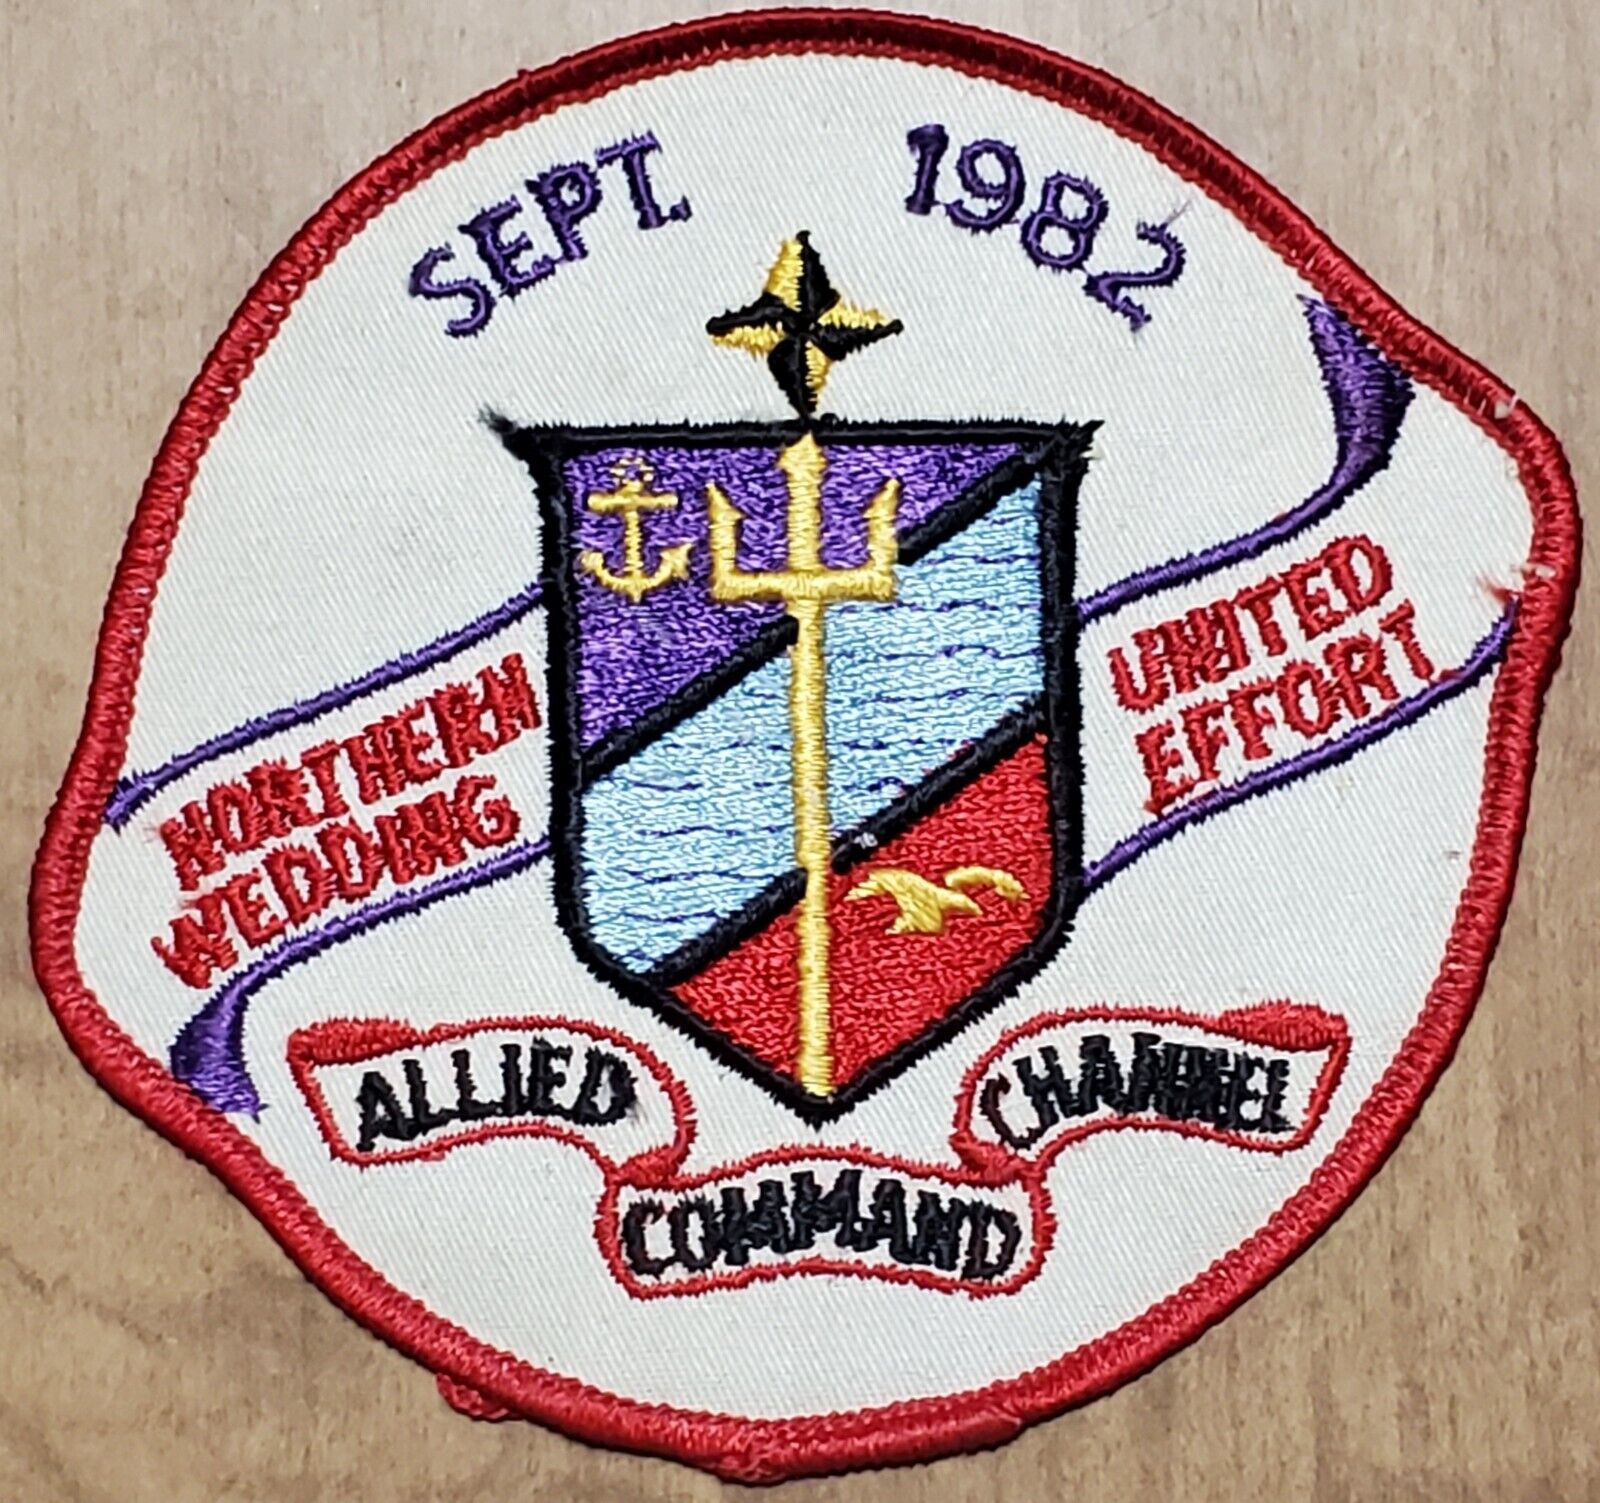 USN NAVY NATO ALLIED COMMAND CHANNEL NATIONAL WEDDING 1982 COLOR PATCH VINTAGE 